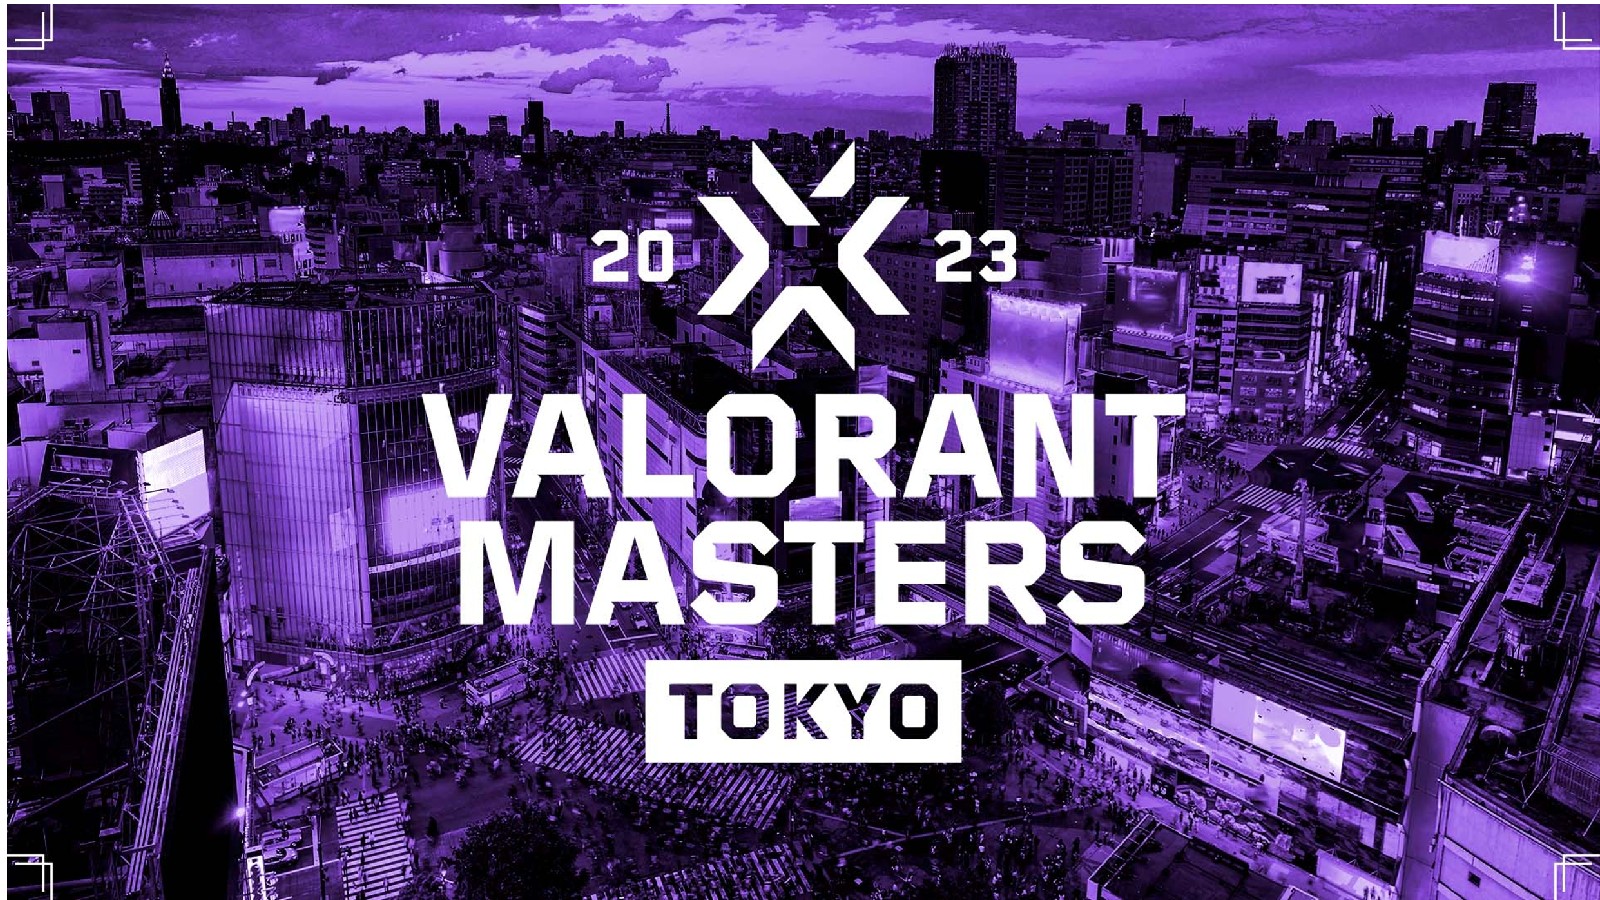 All Valorant teams qualified for VCT Masters Tokyo - Dexerto